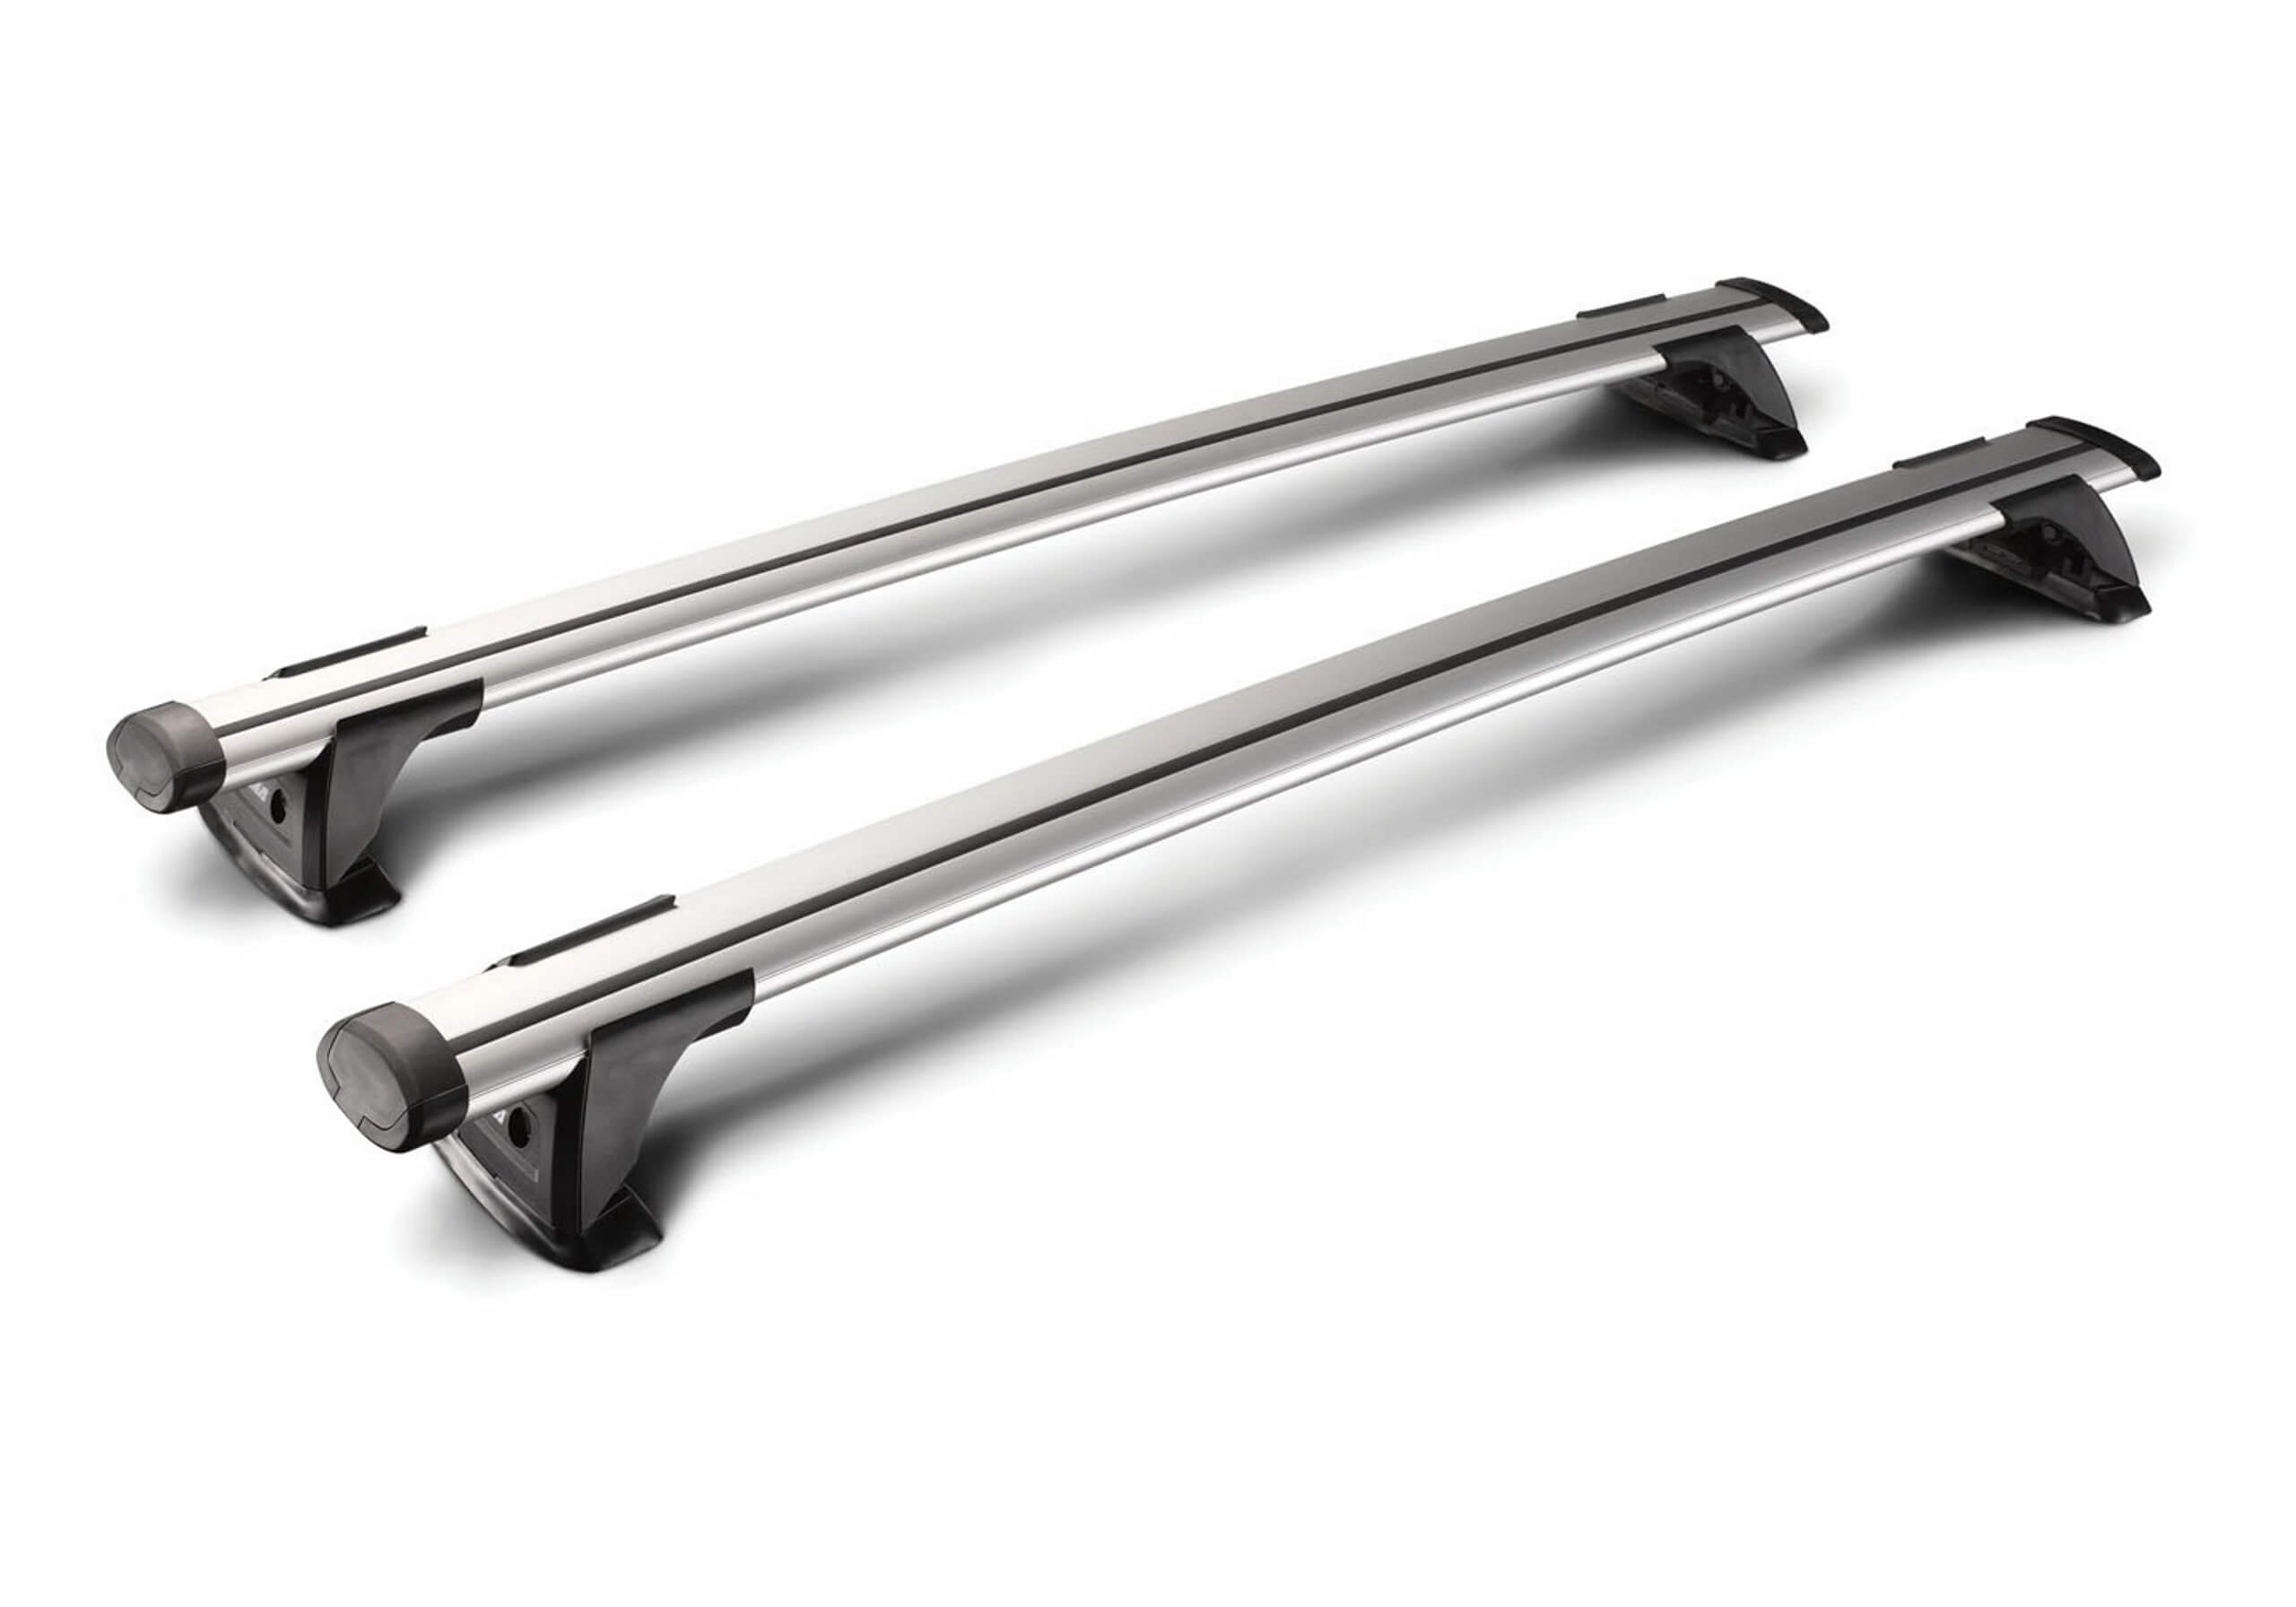 Vauxhall Vectra four door saloon (1996 to 2002):Yakima roof bars package - S15 silver bars with K089 kit